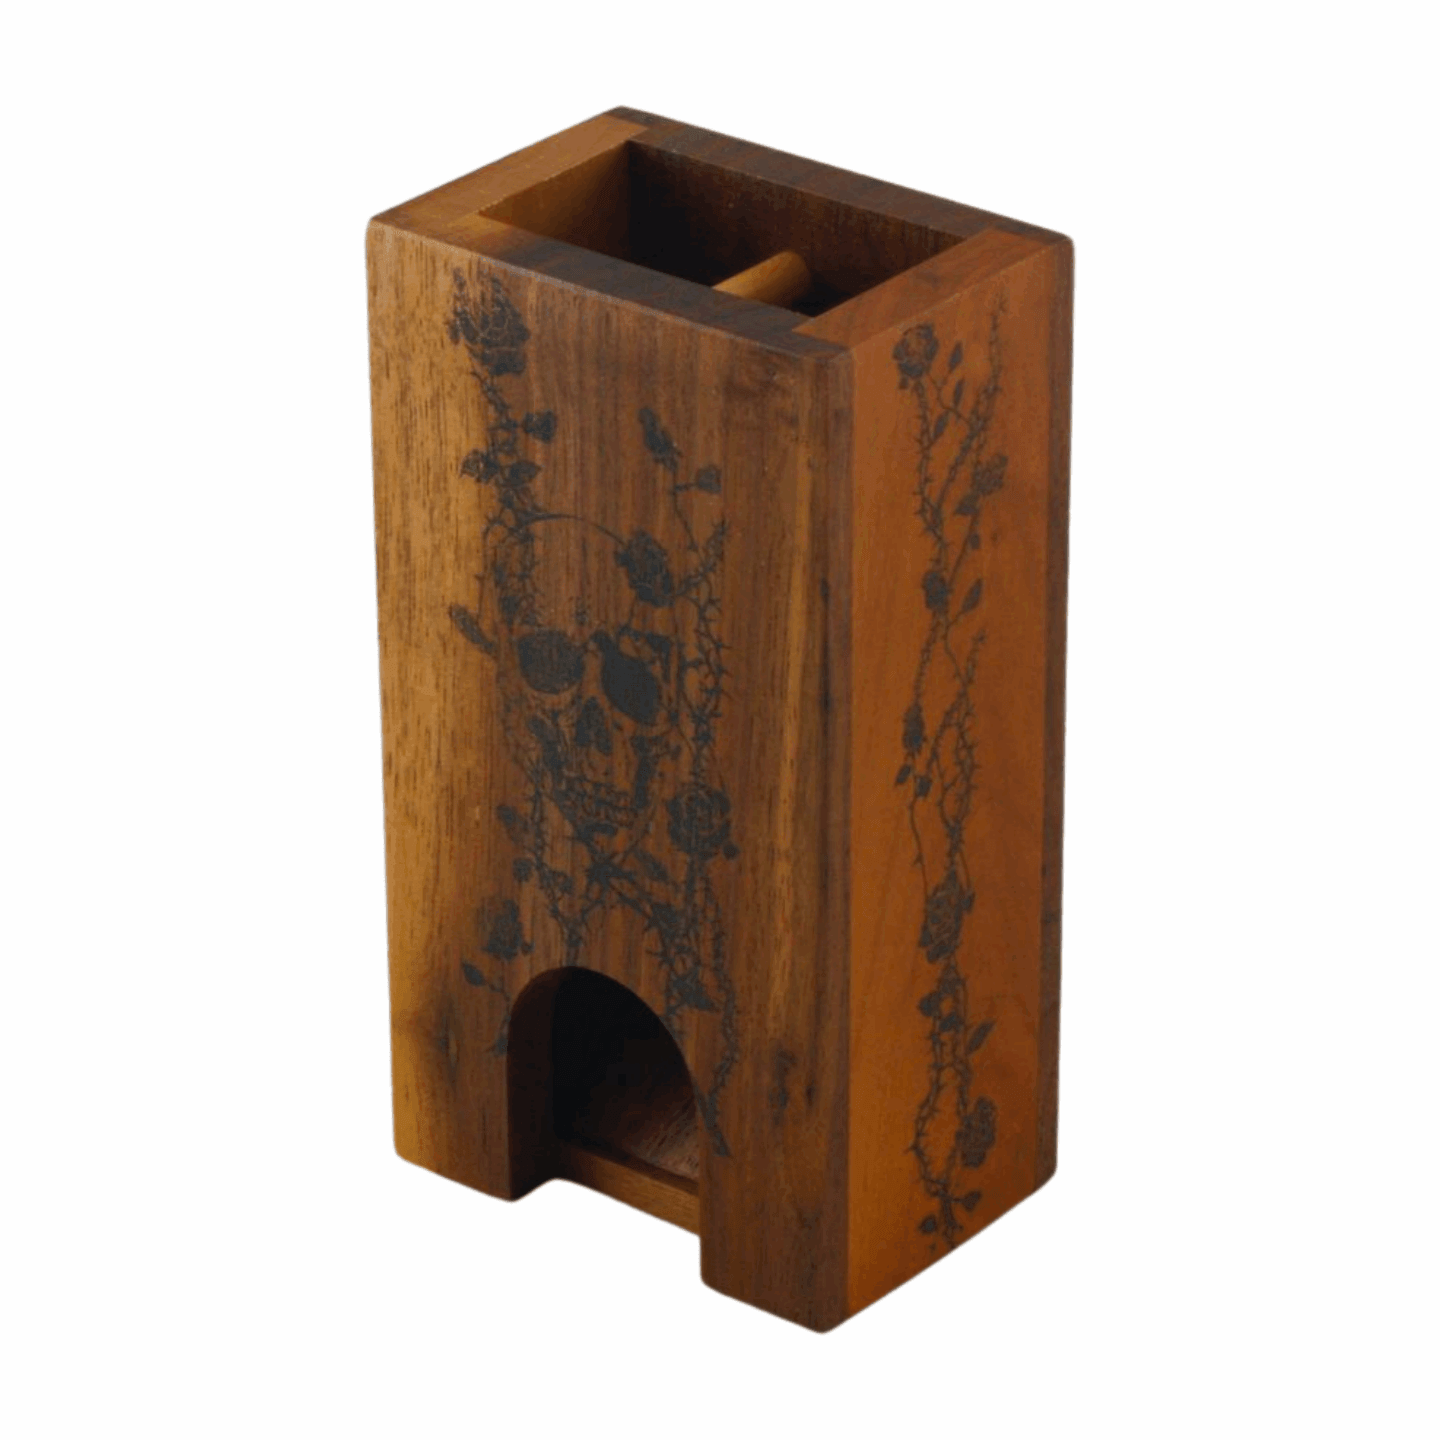 Small Walnut and Cherry Dice Tower with Skull and Roses Design - Dragon Armor Games